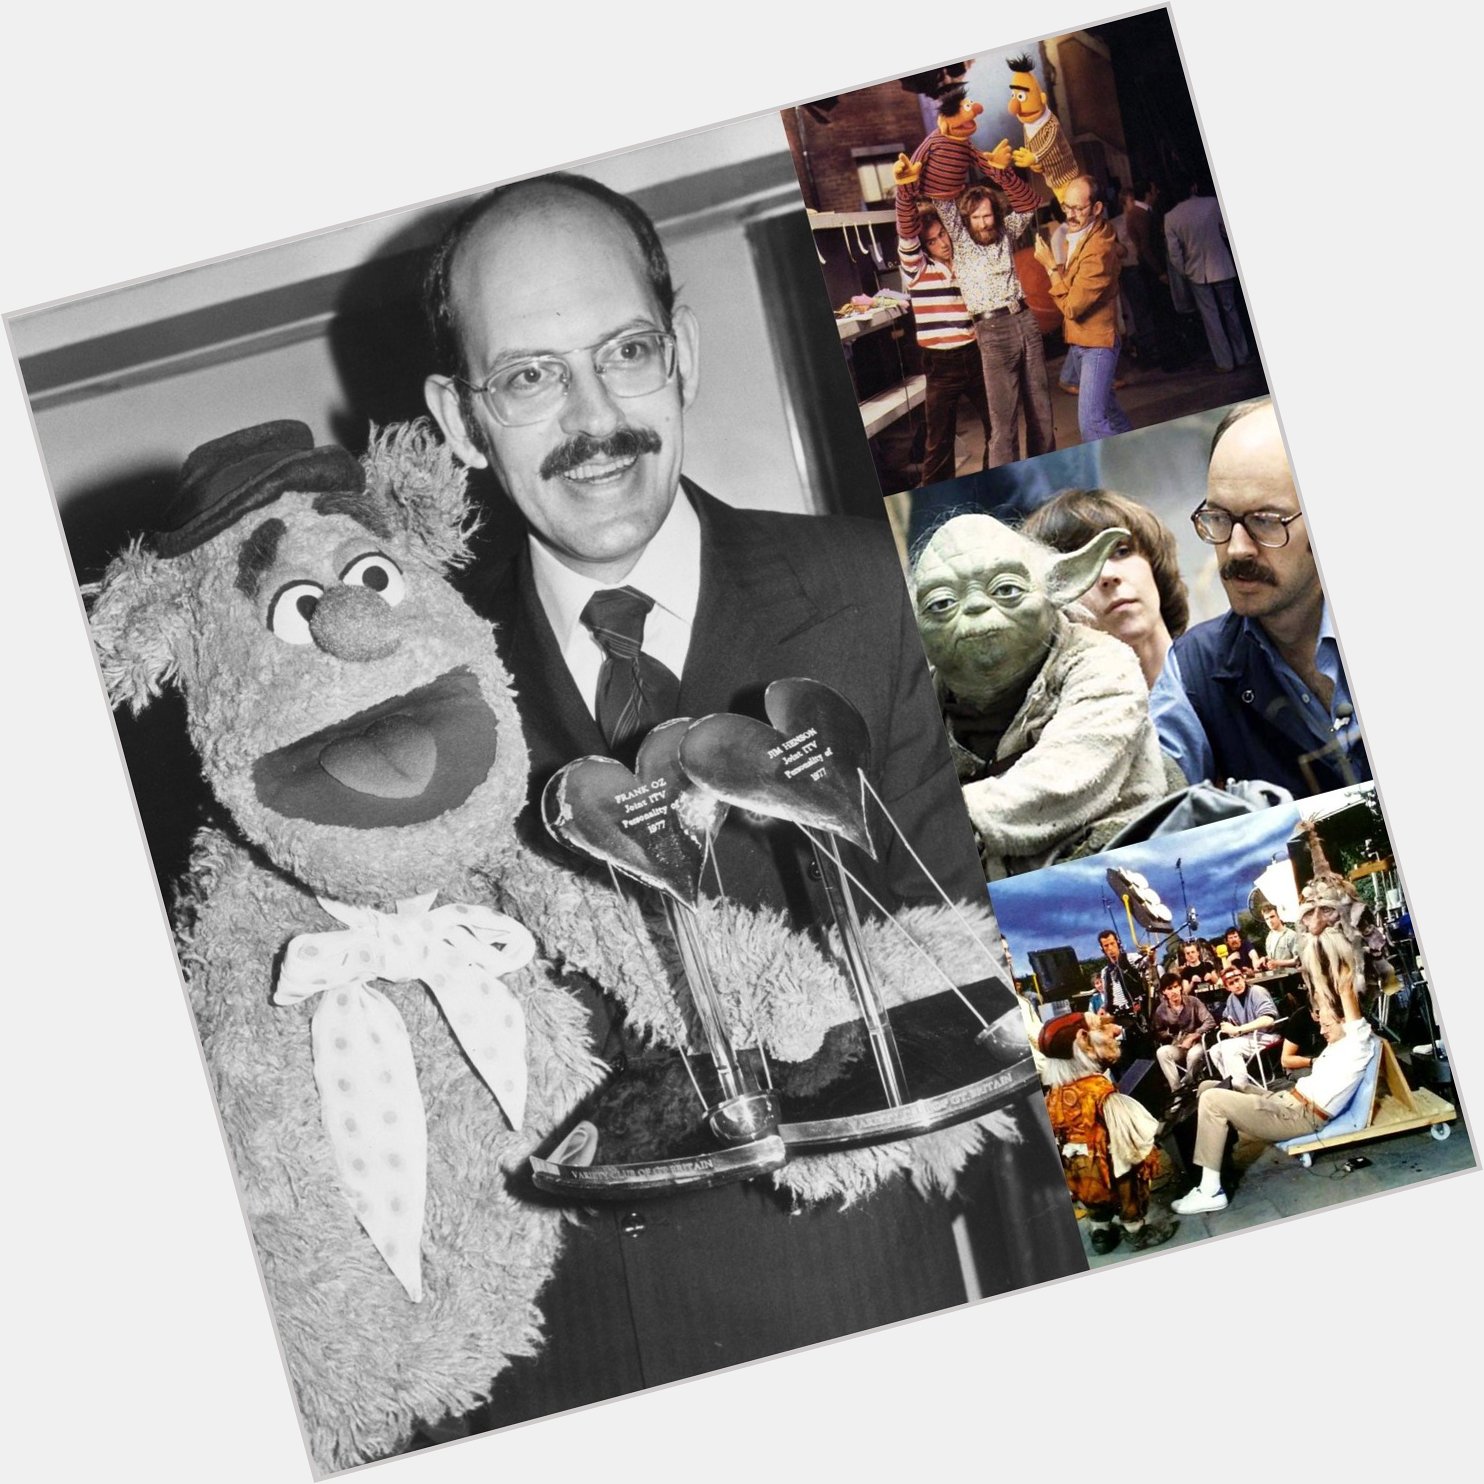 Happy birthday to American actor, puppeteer, director and producer Frank Oz, born May 25, 1944. 